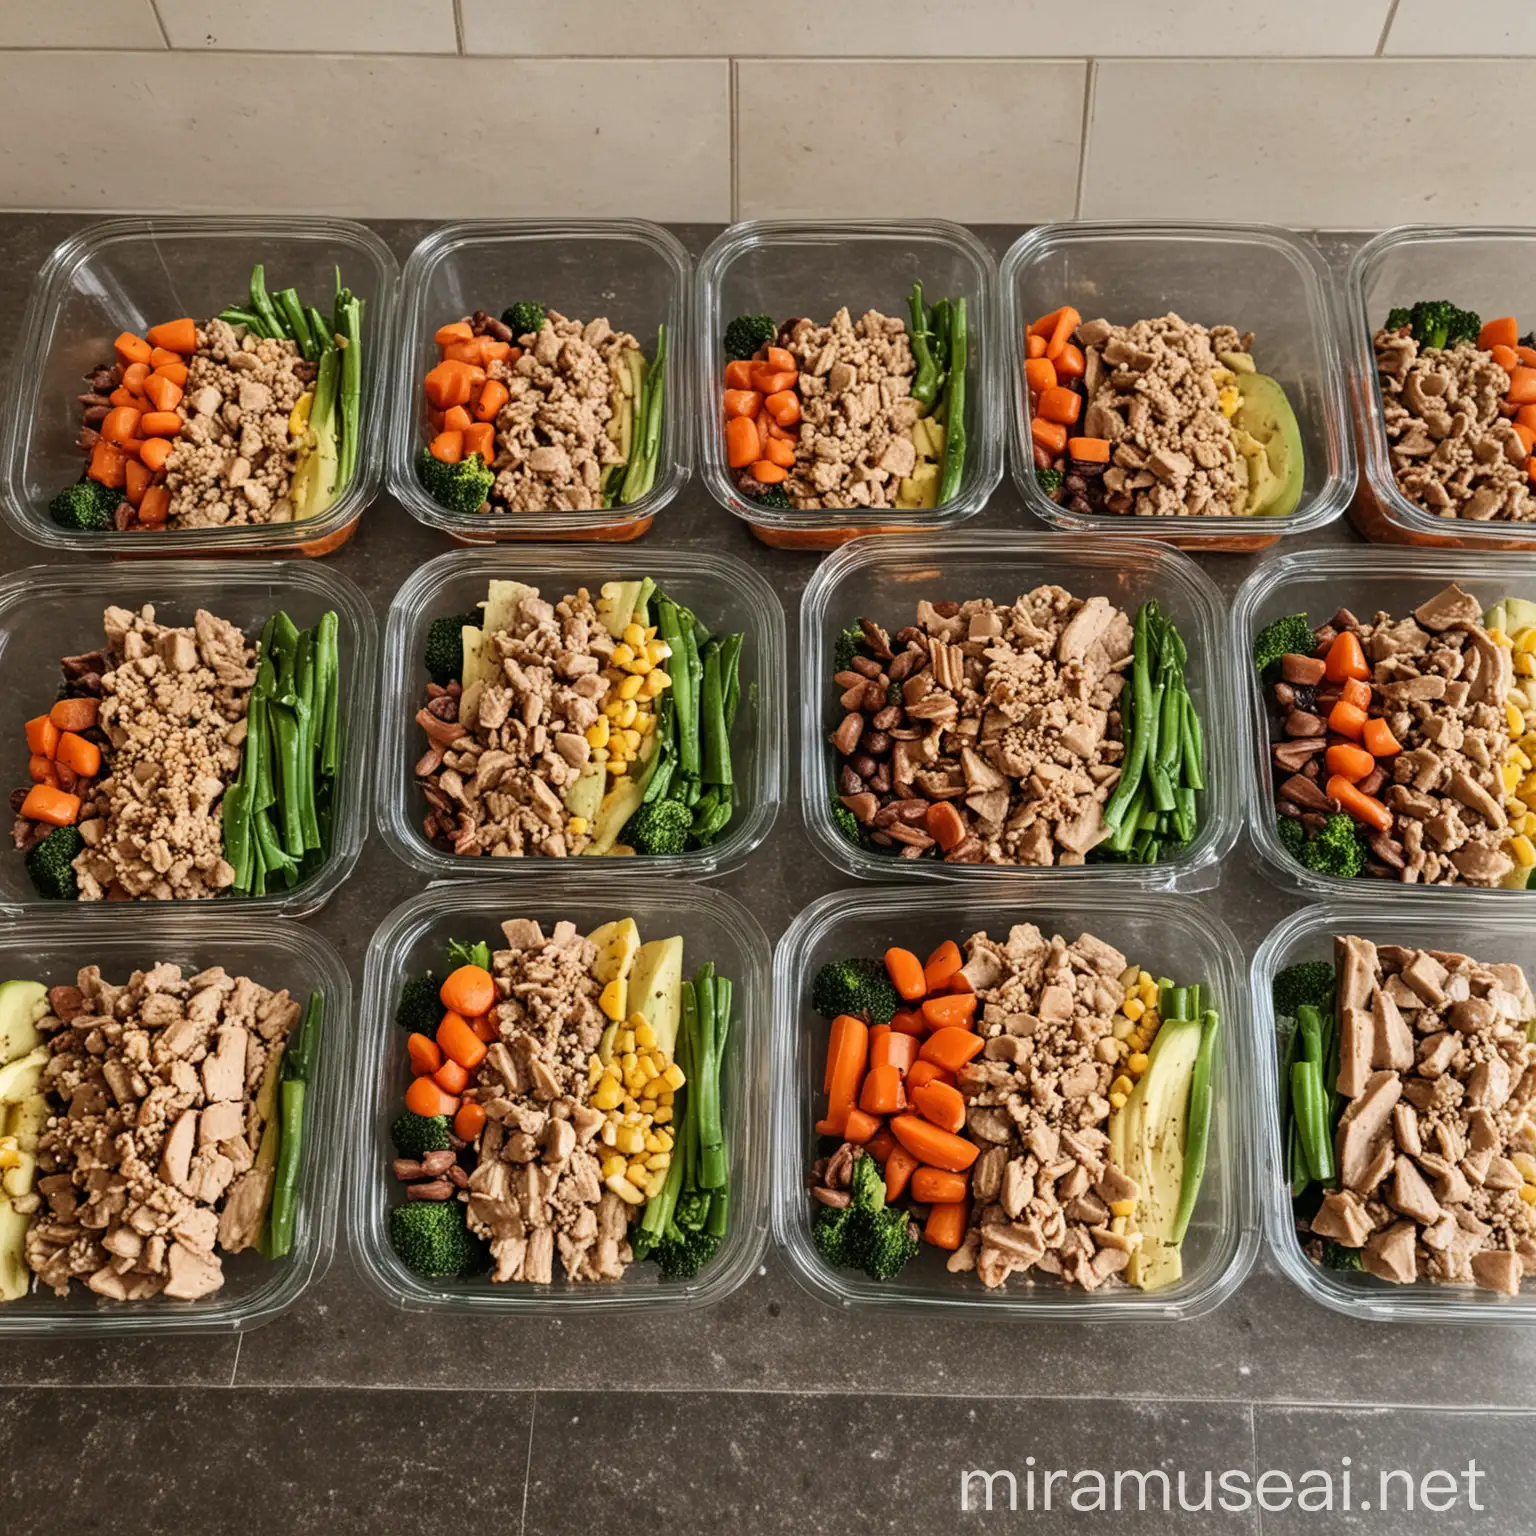 Healthy Meal Prep Fresh Ingredients and Organized Cooking